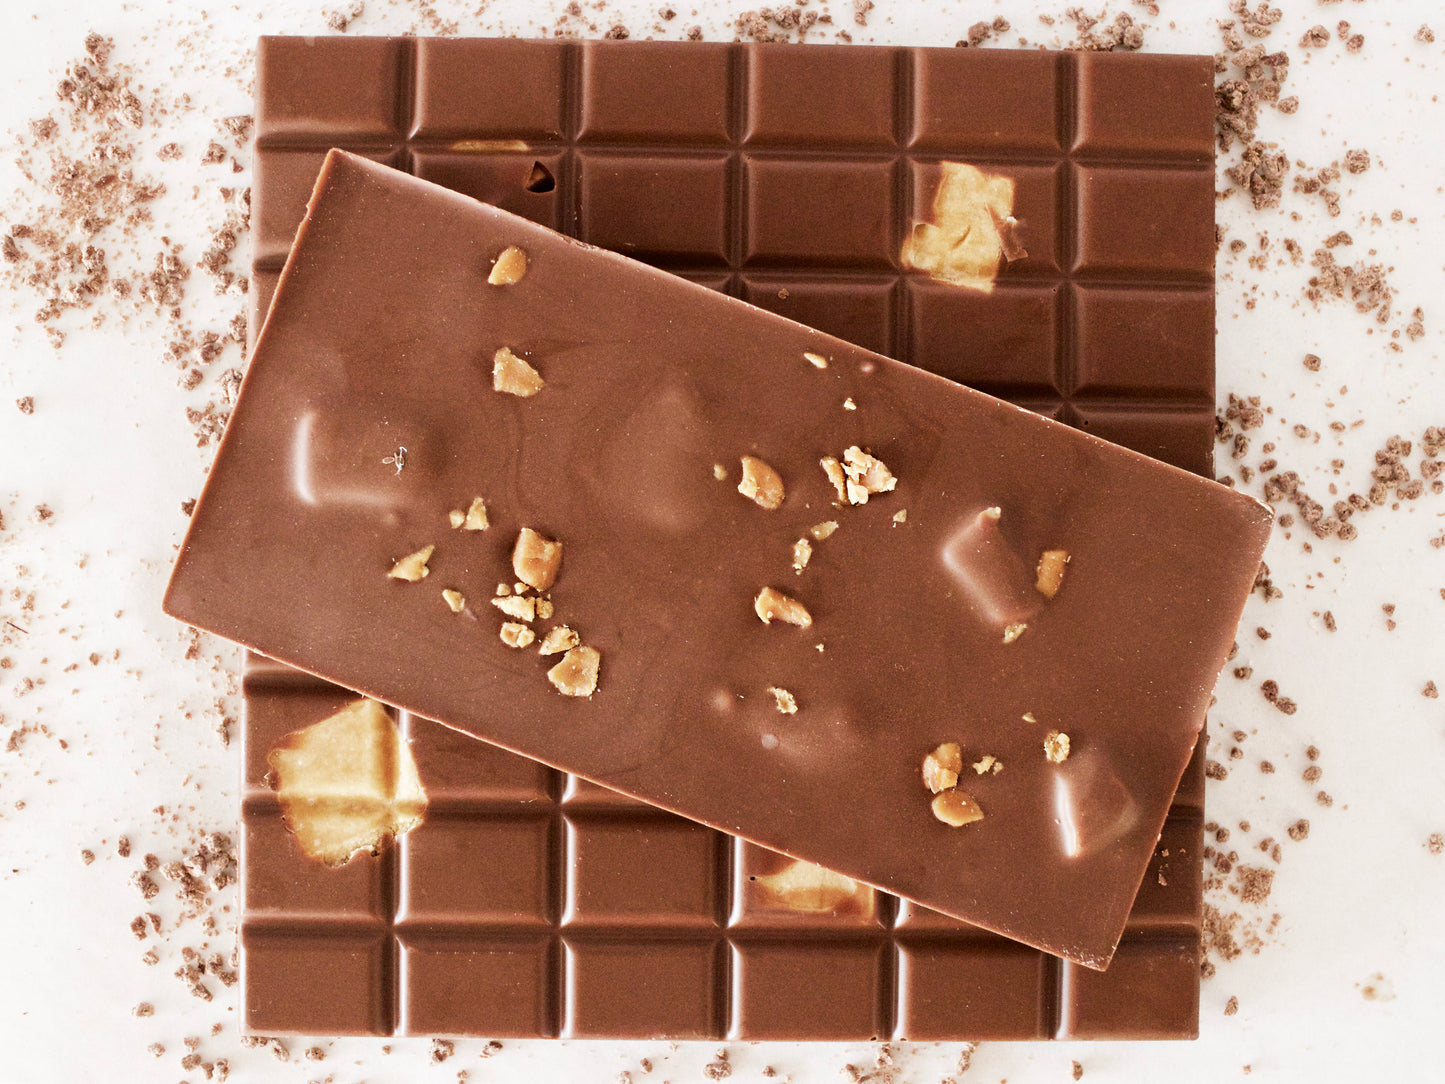 image shows 3, 100g hand made milk chocolate bars embedded with our own recipe vanilla fudge